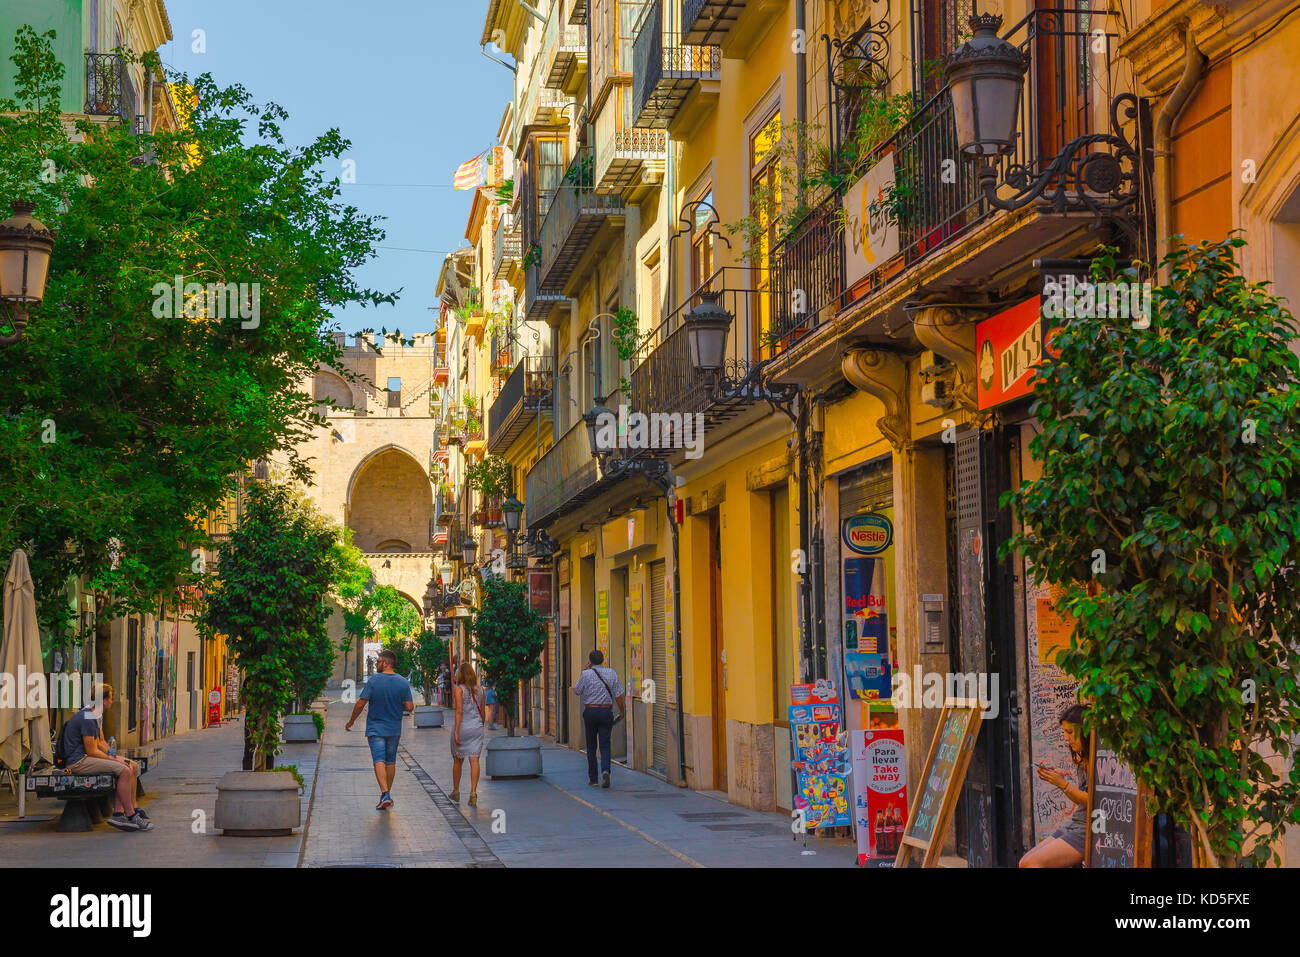 Valencia city, rear view of a couple walking towards the Torres Serranos city gate in the historic old town quarter of Valencia, Spain. Stock Photo